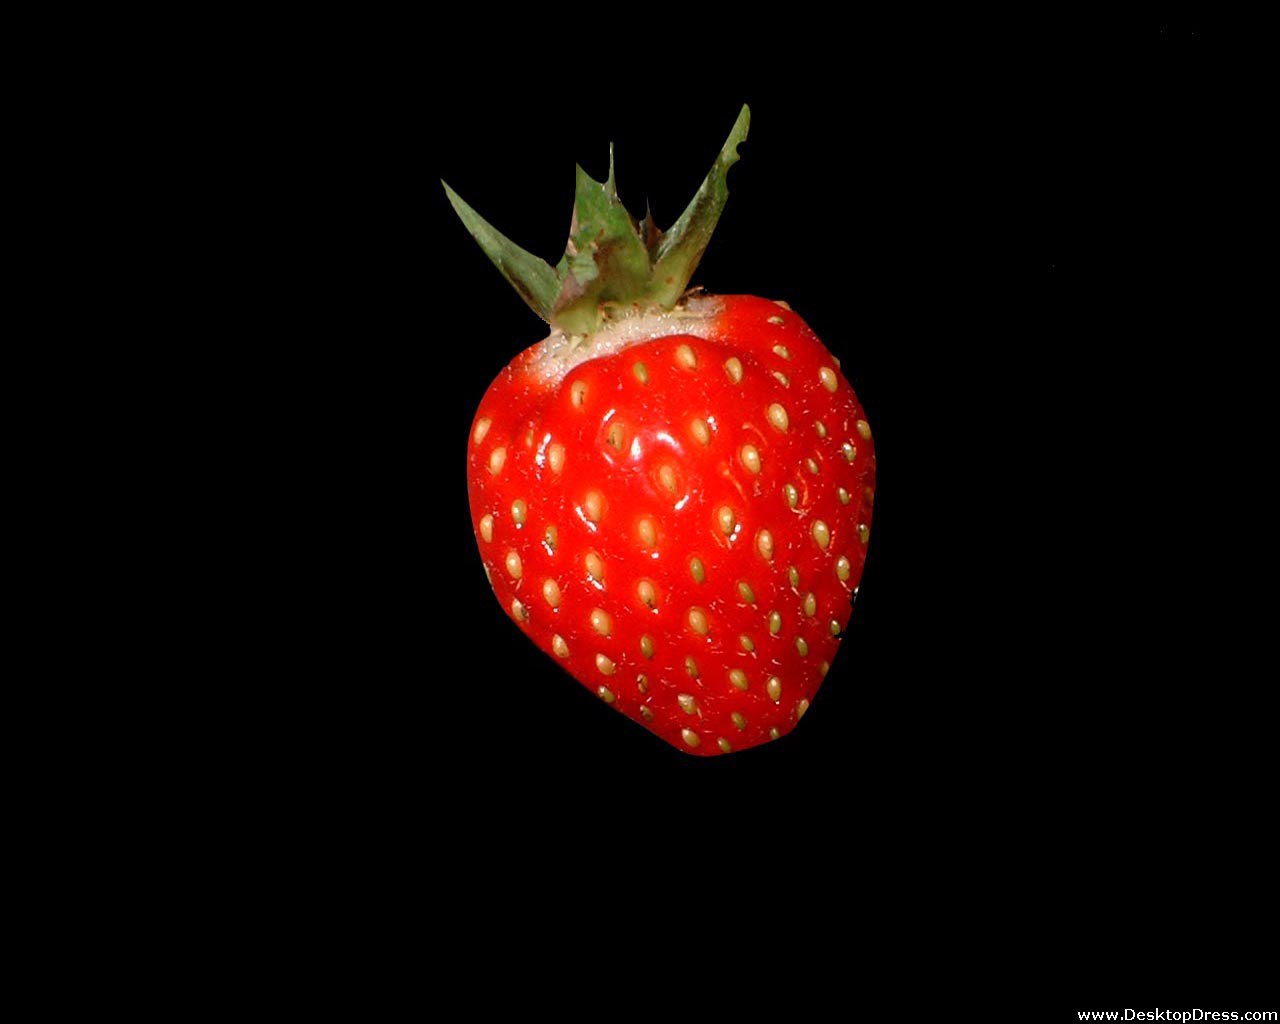 Desktop Wallpapers Other Backgrounds Strawberry www 1280x1024